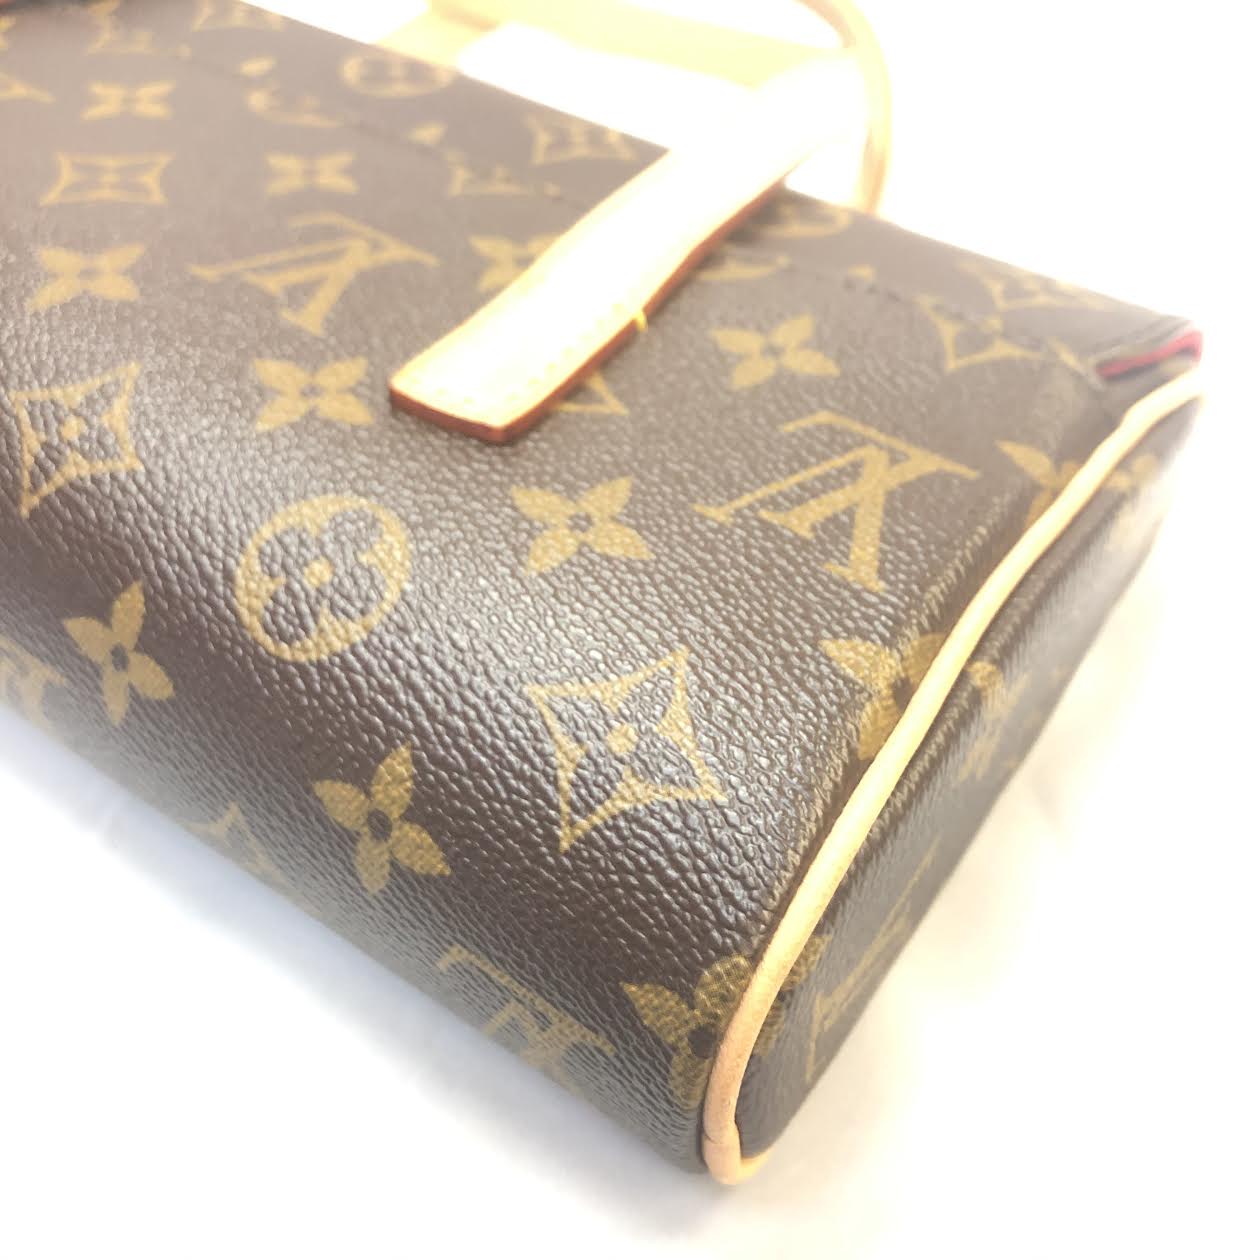 How To Treat Louis Vuitton Leather